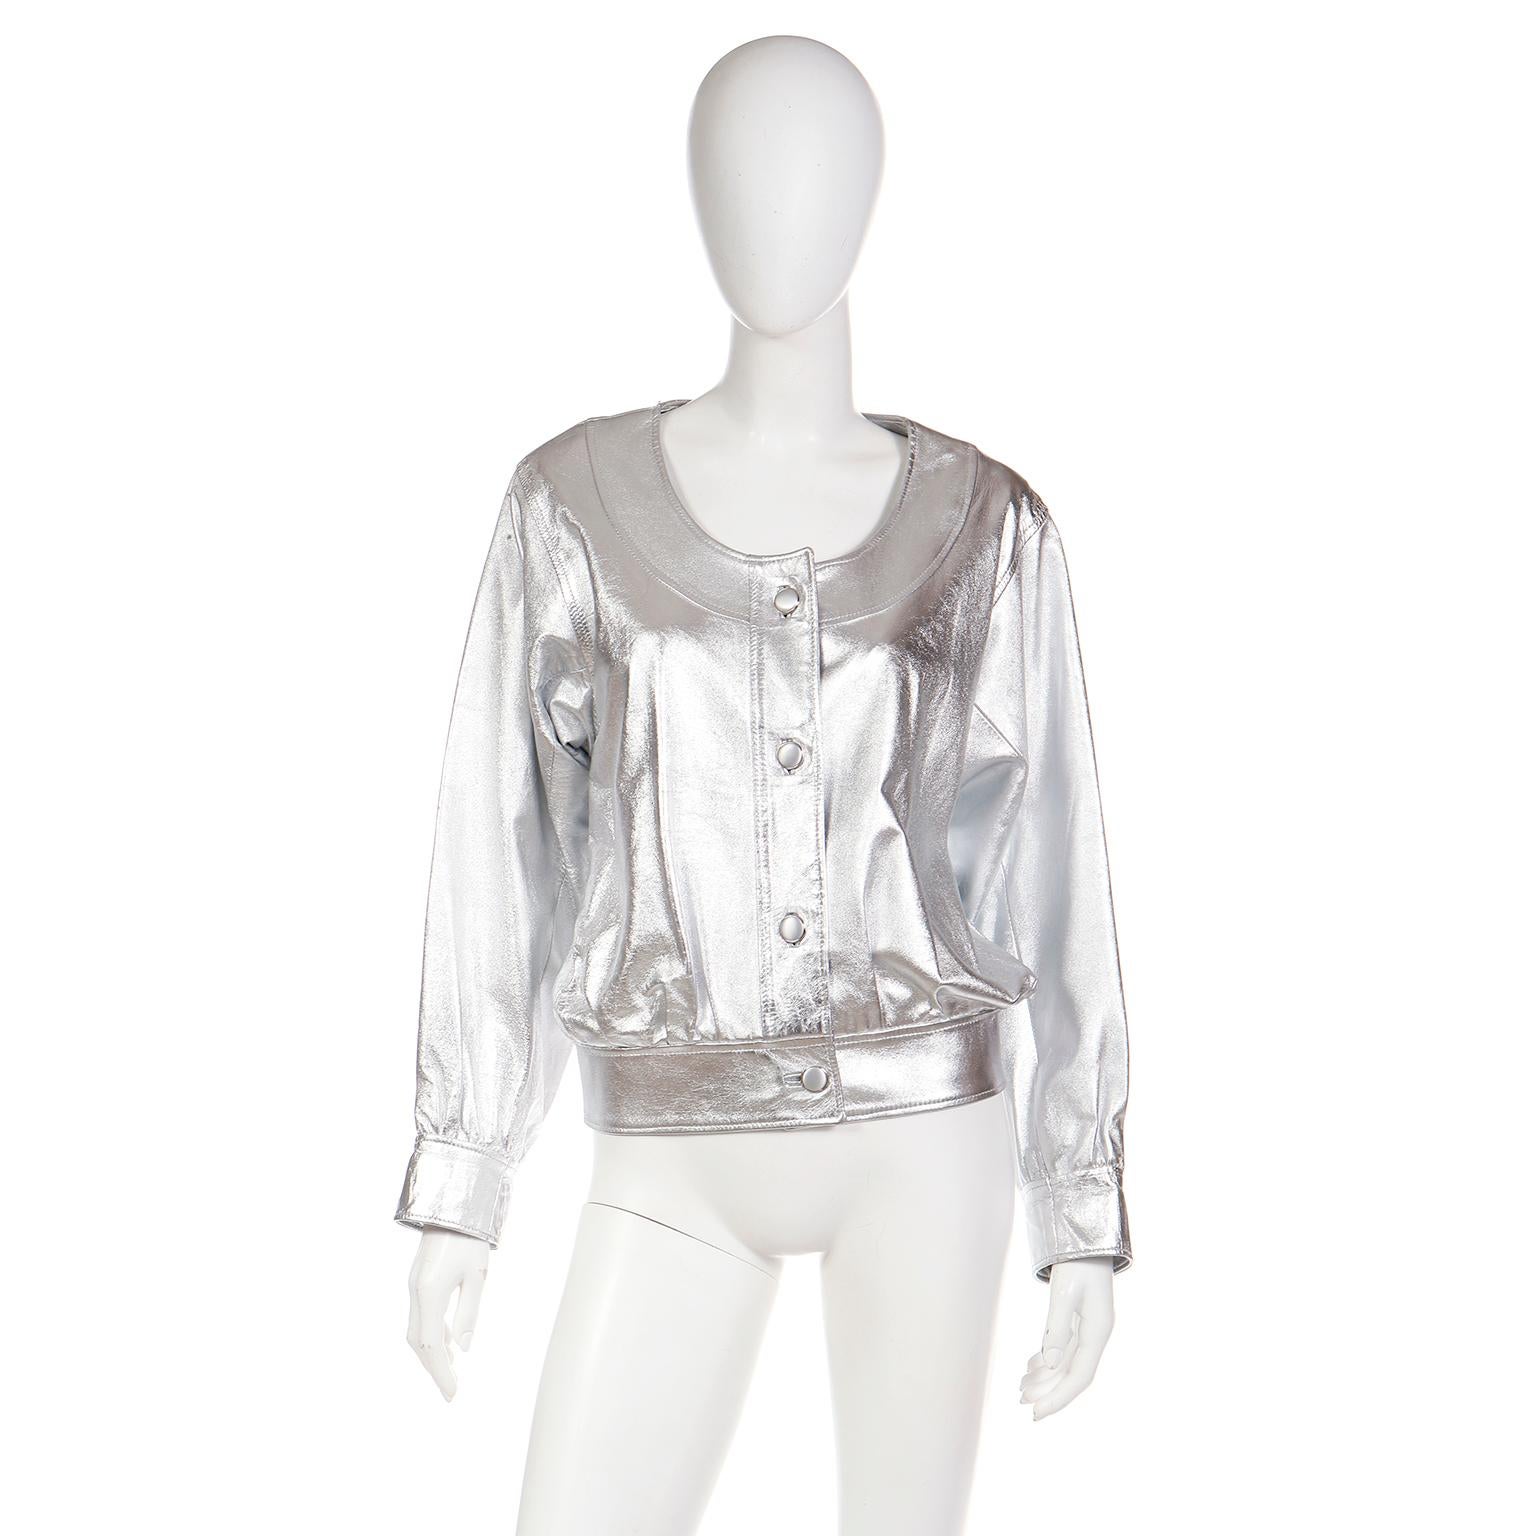 1982 Yves Saint Laurent Silver Leather Documented Runway Jacket In Excellent Condition For Sale In Portland, OR